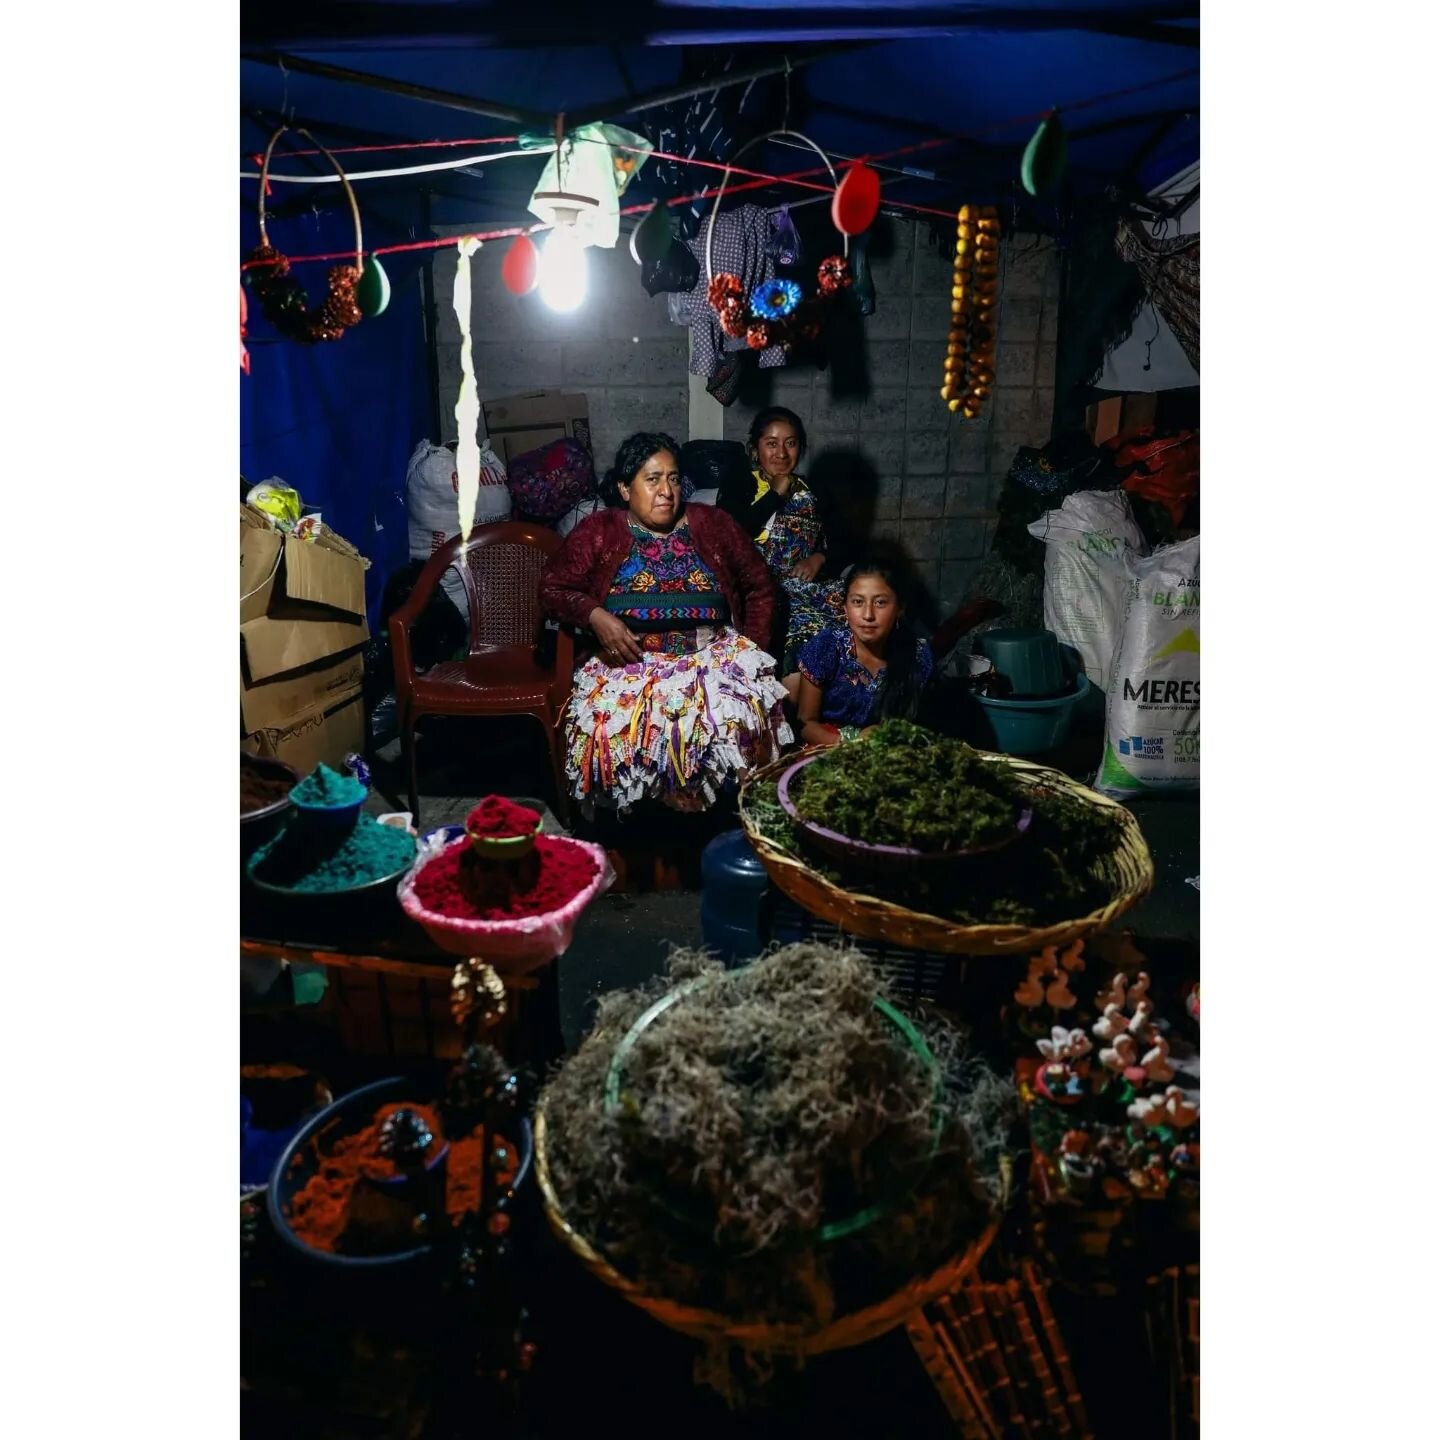 Merry Christmas from Guatemala. May your peace and love be felt deep, I truly wish this for you. 
.
1. A mother gathers her children for a family picture at the Christmas market. 
2. A woman keeps the fire going with her bare hands.
3. A young girl w